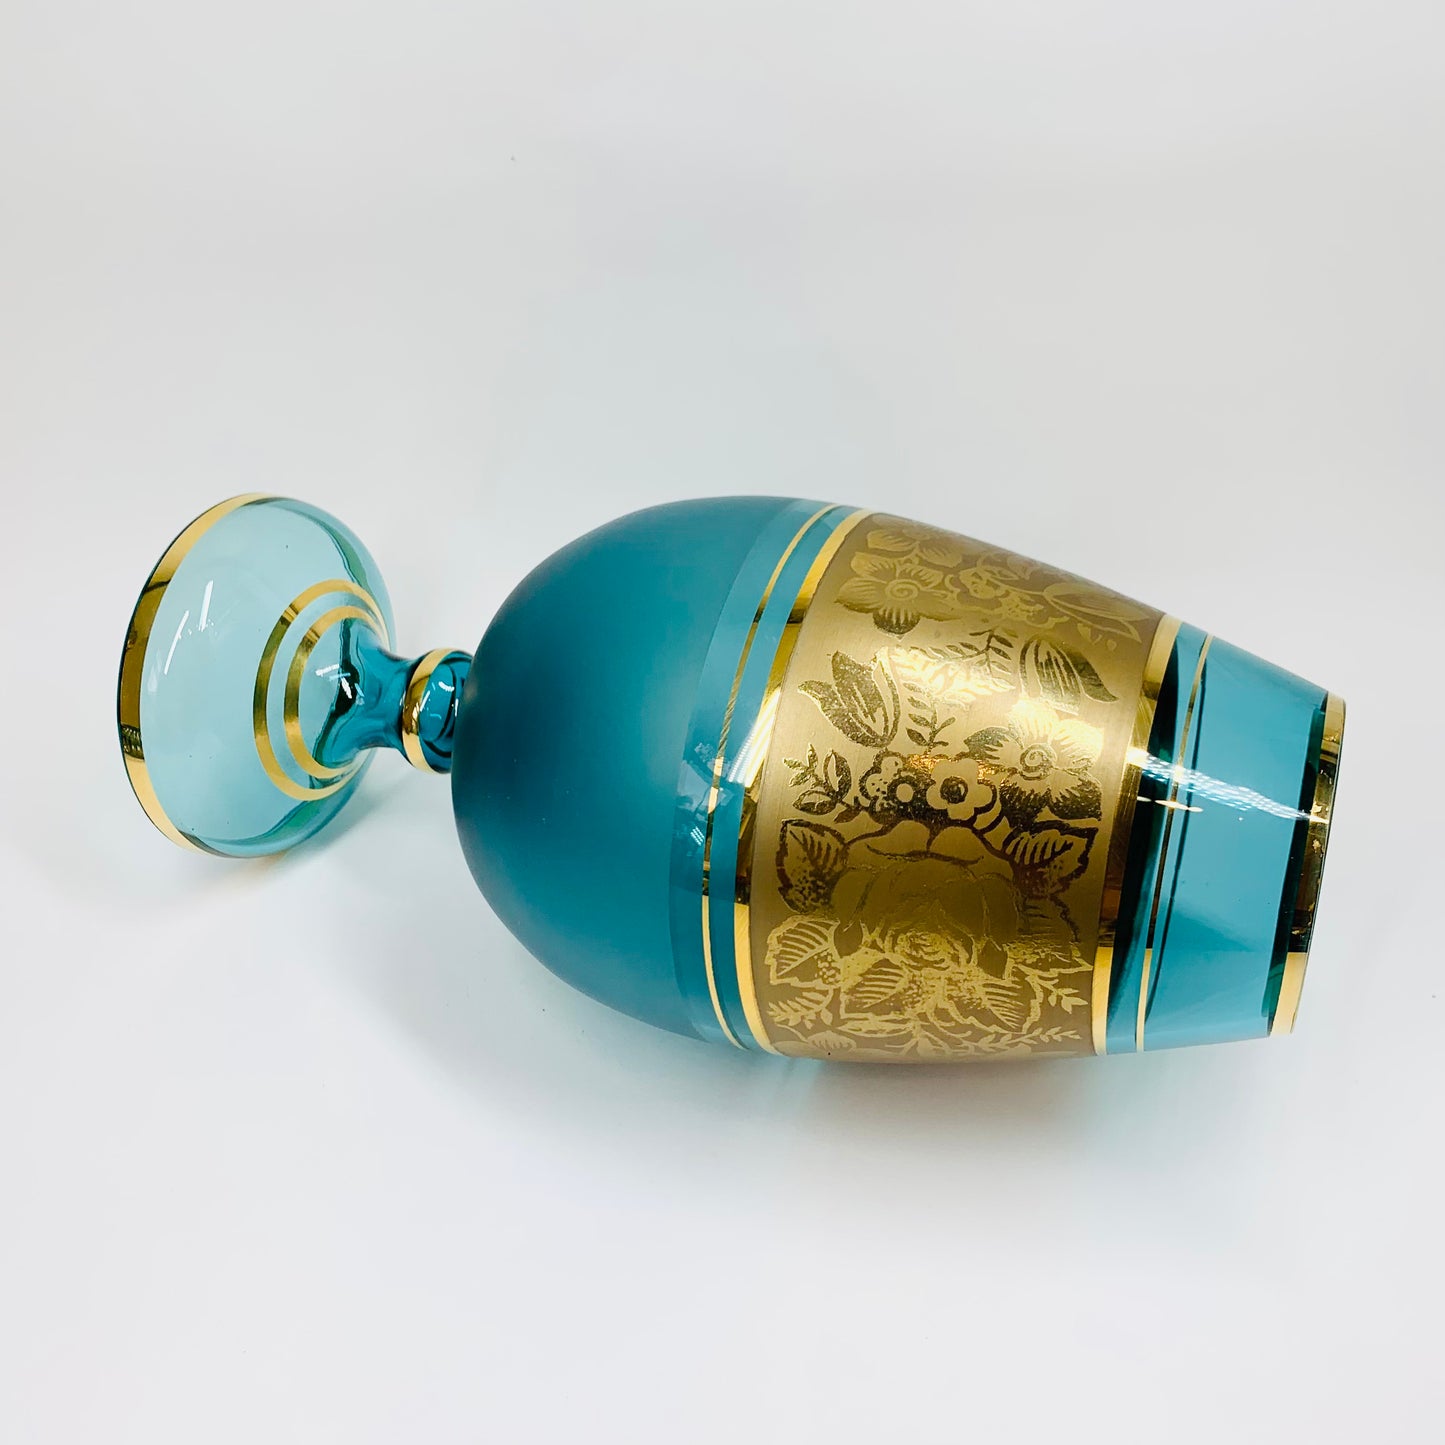 Rare Midcentury Bohemian turquoise glass footed vase with gold gilding